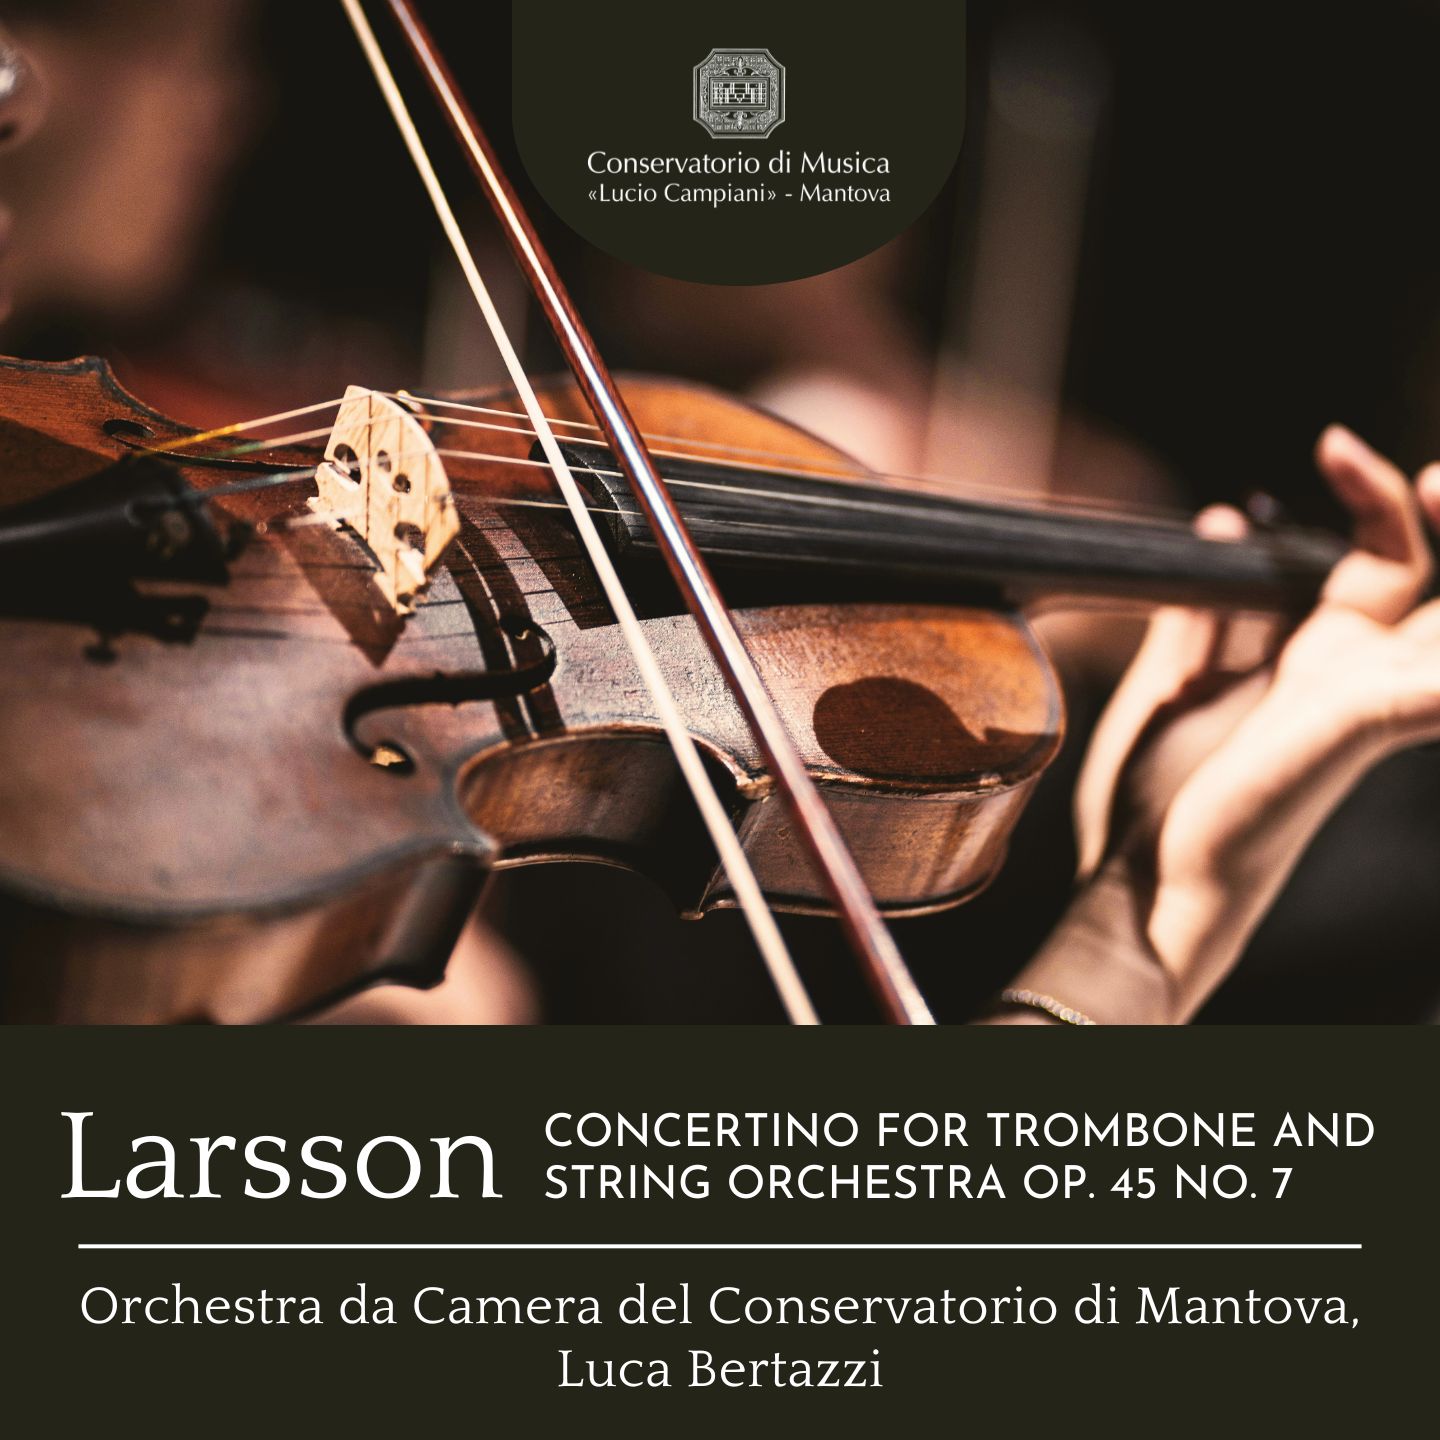 Larsson: Concertino for Trombone and String Orchestra, Op. 45 No. 7 